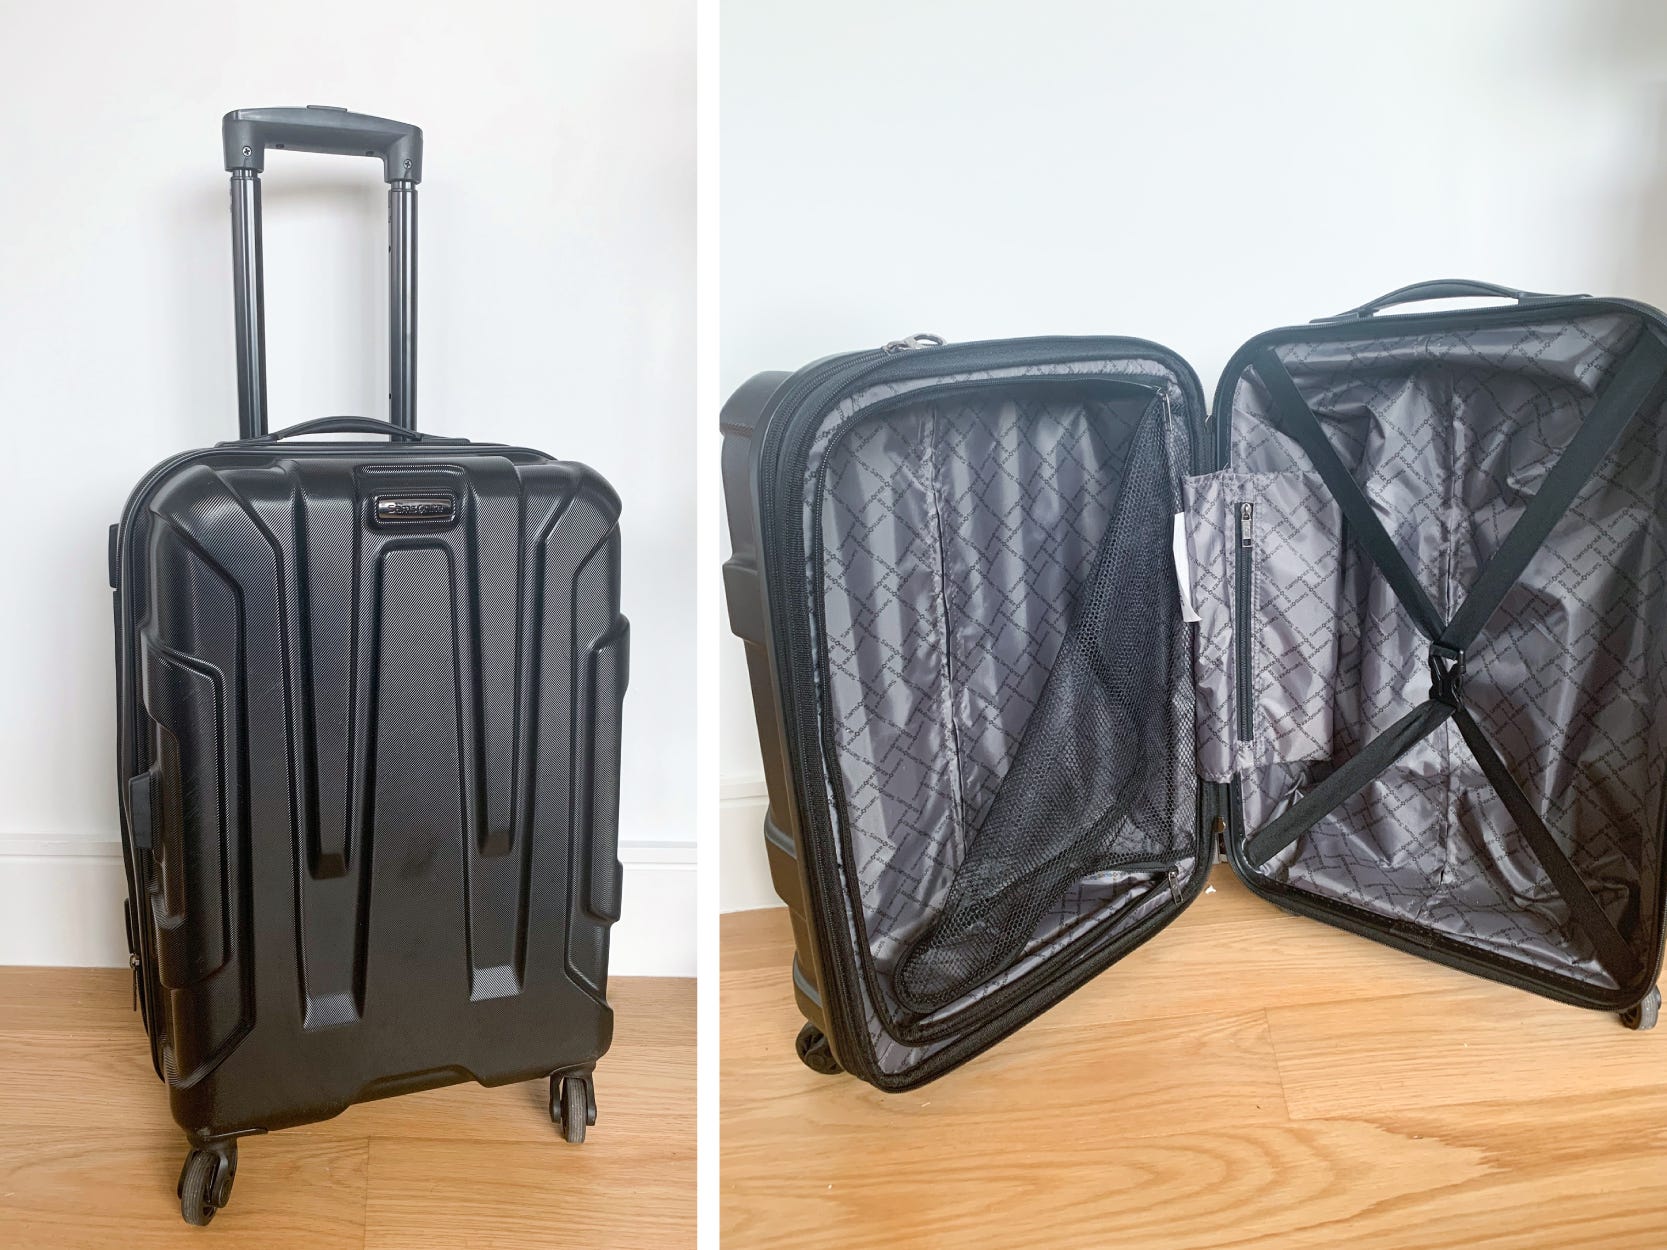 Best Carry-on luggage - samsonite side by side